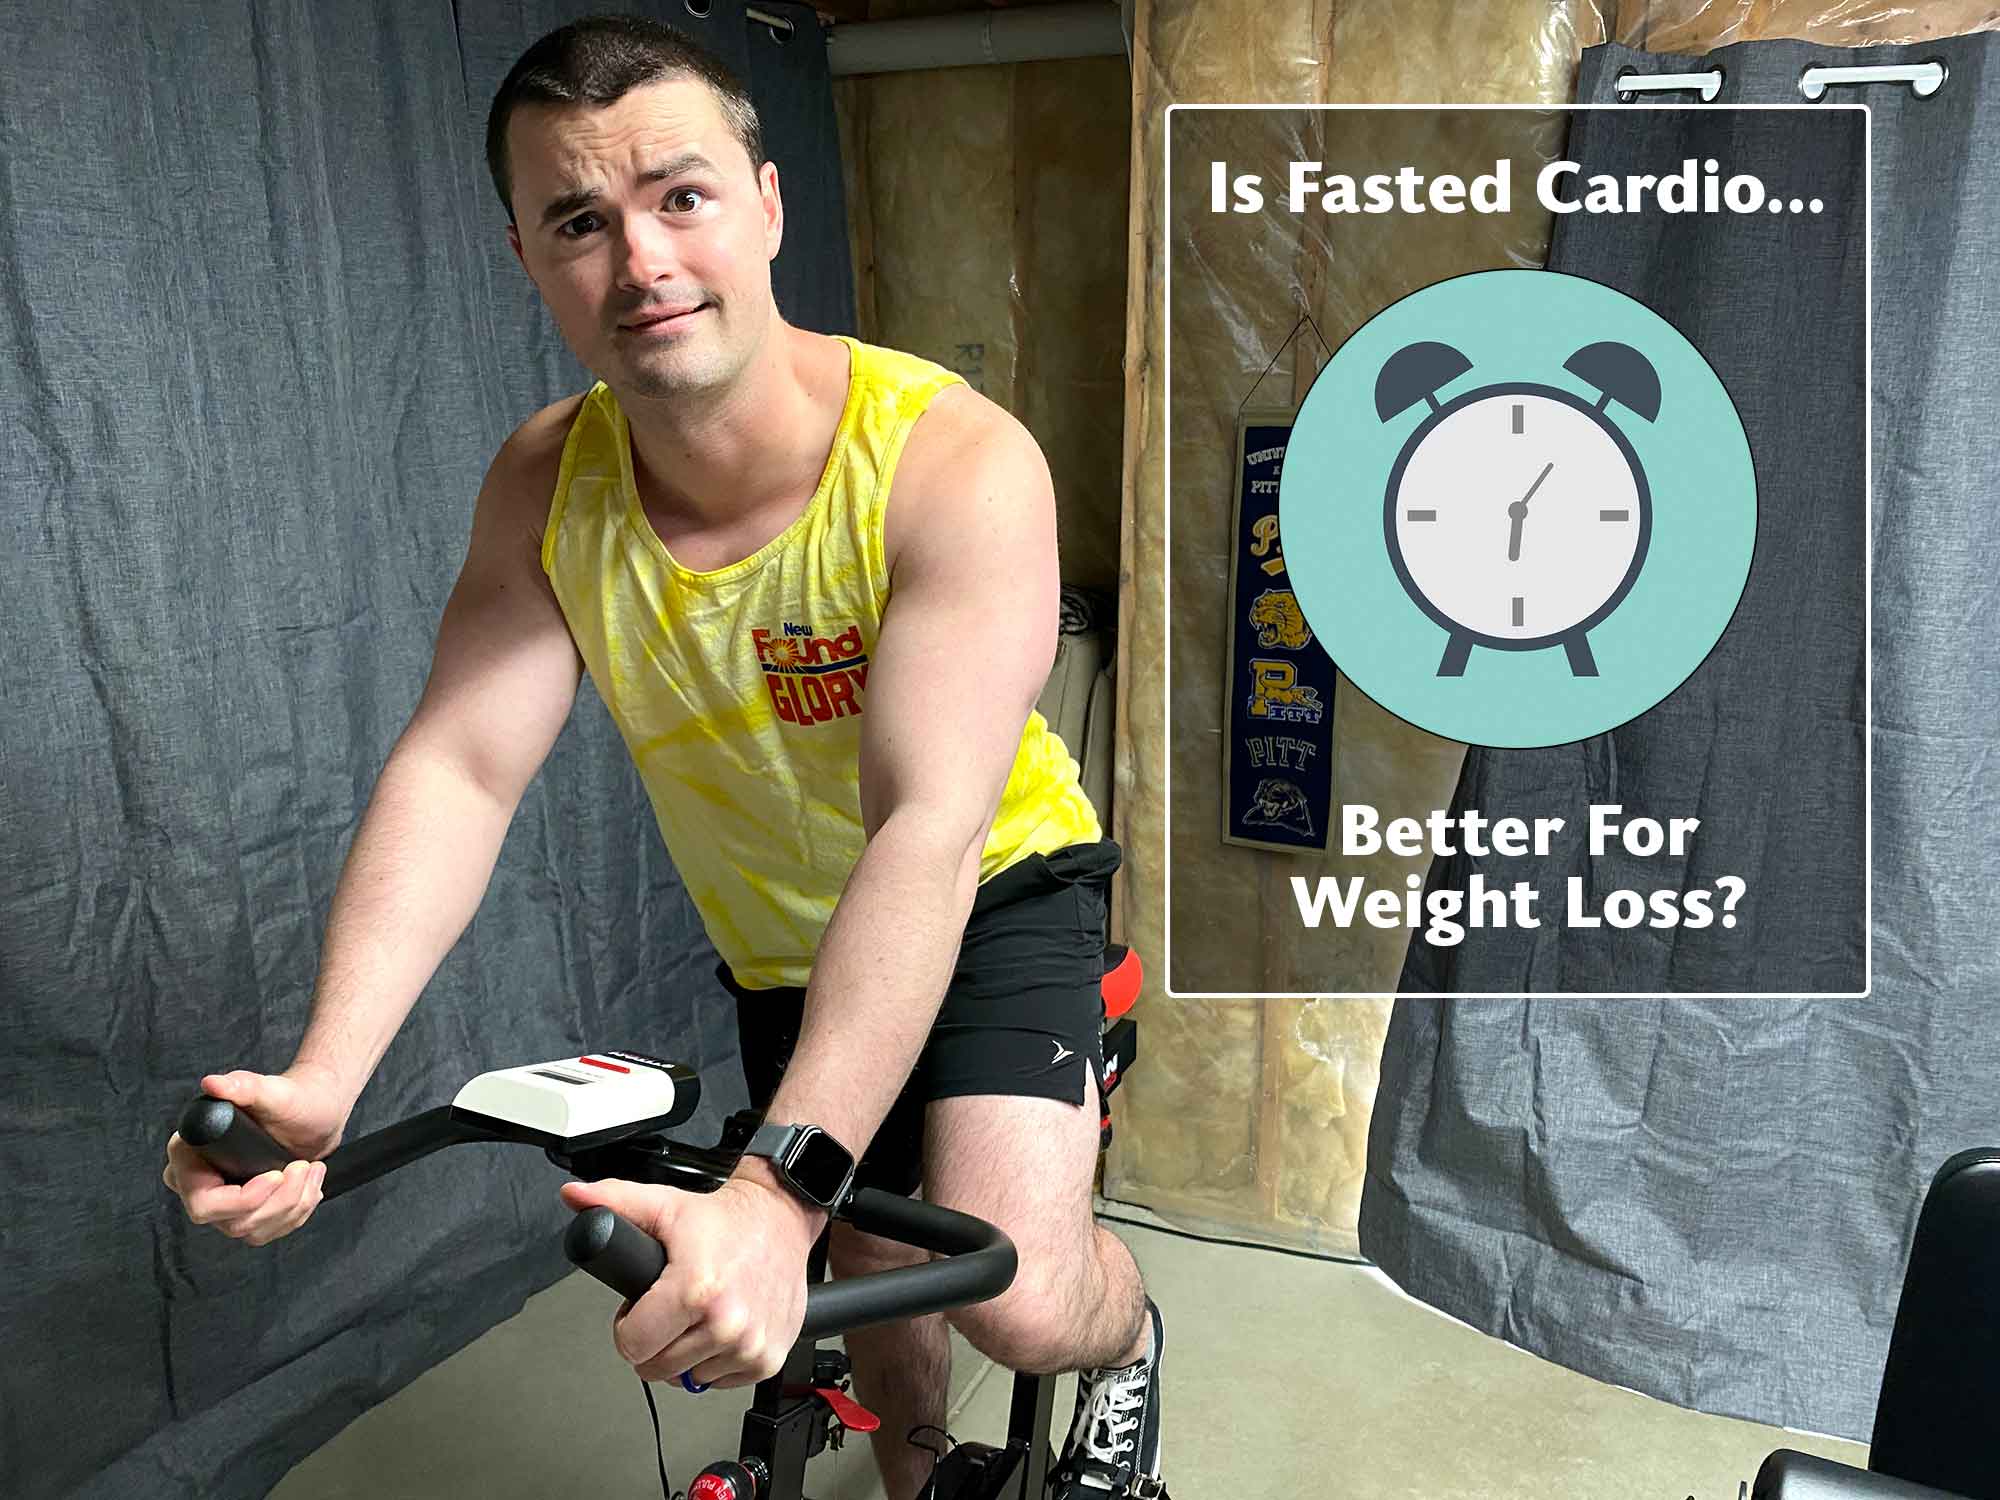 Is Fasted Cardio Better Than Regular Cardio for Weight Loss?